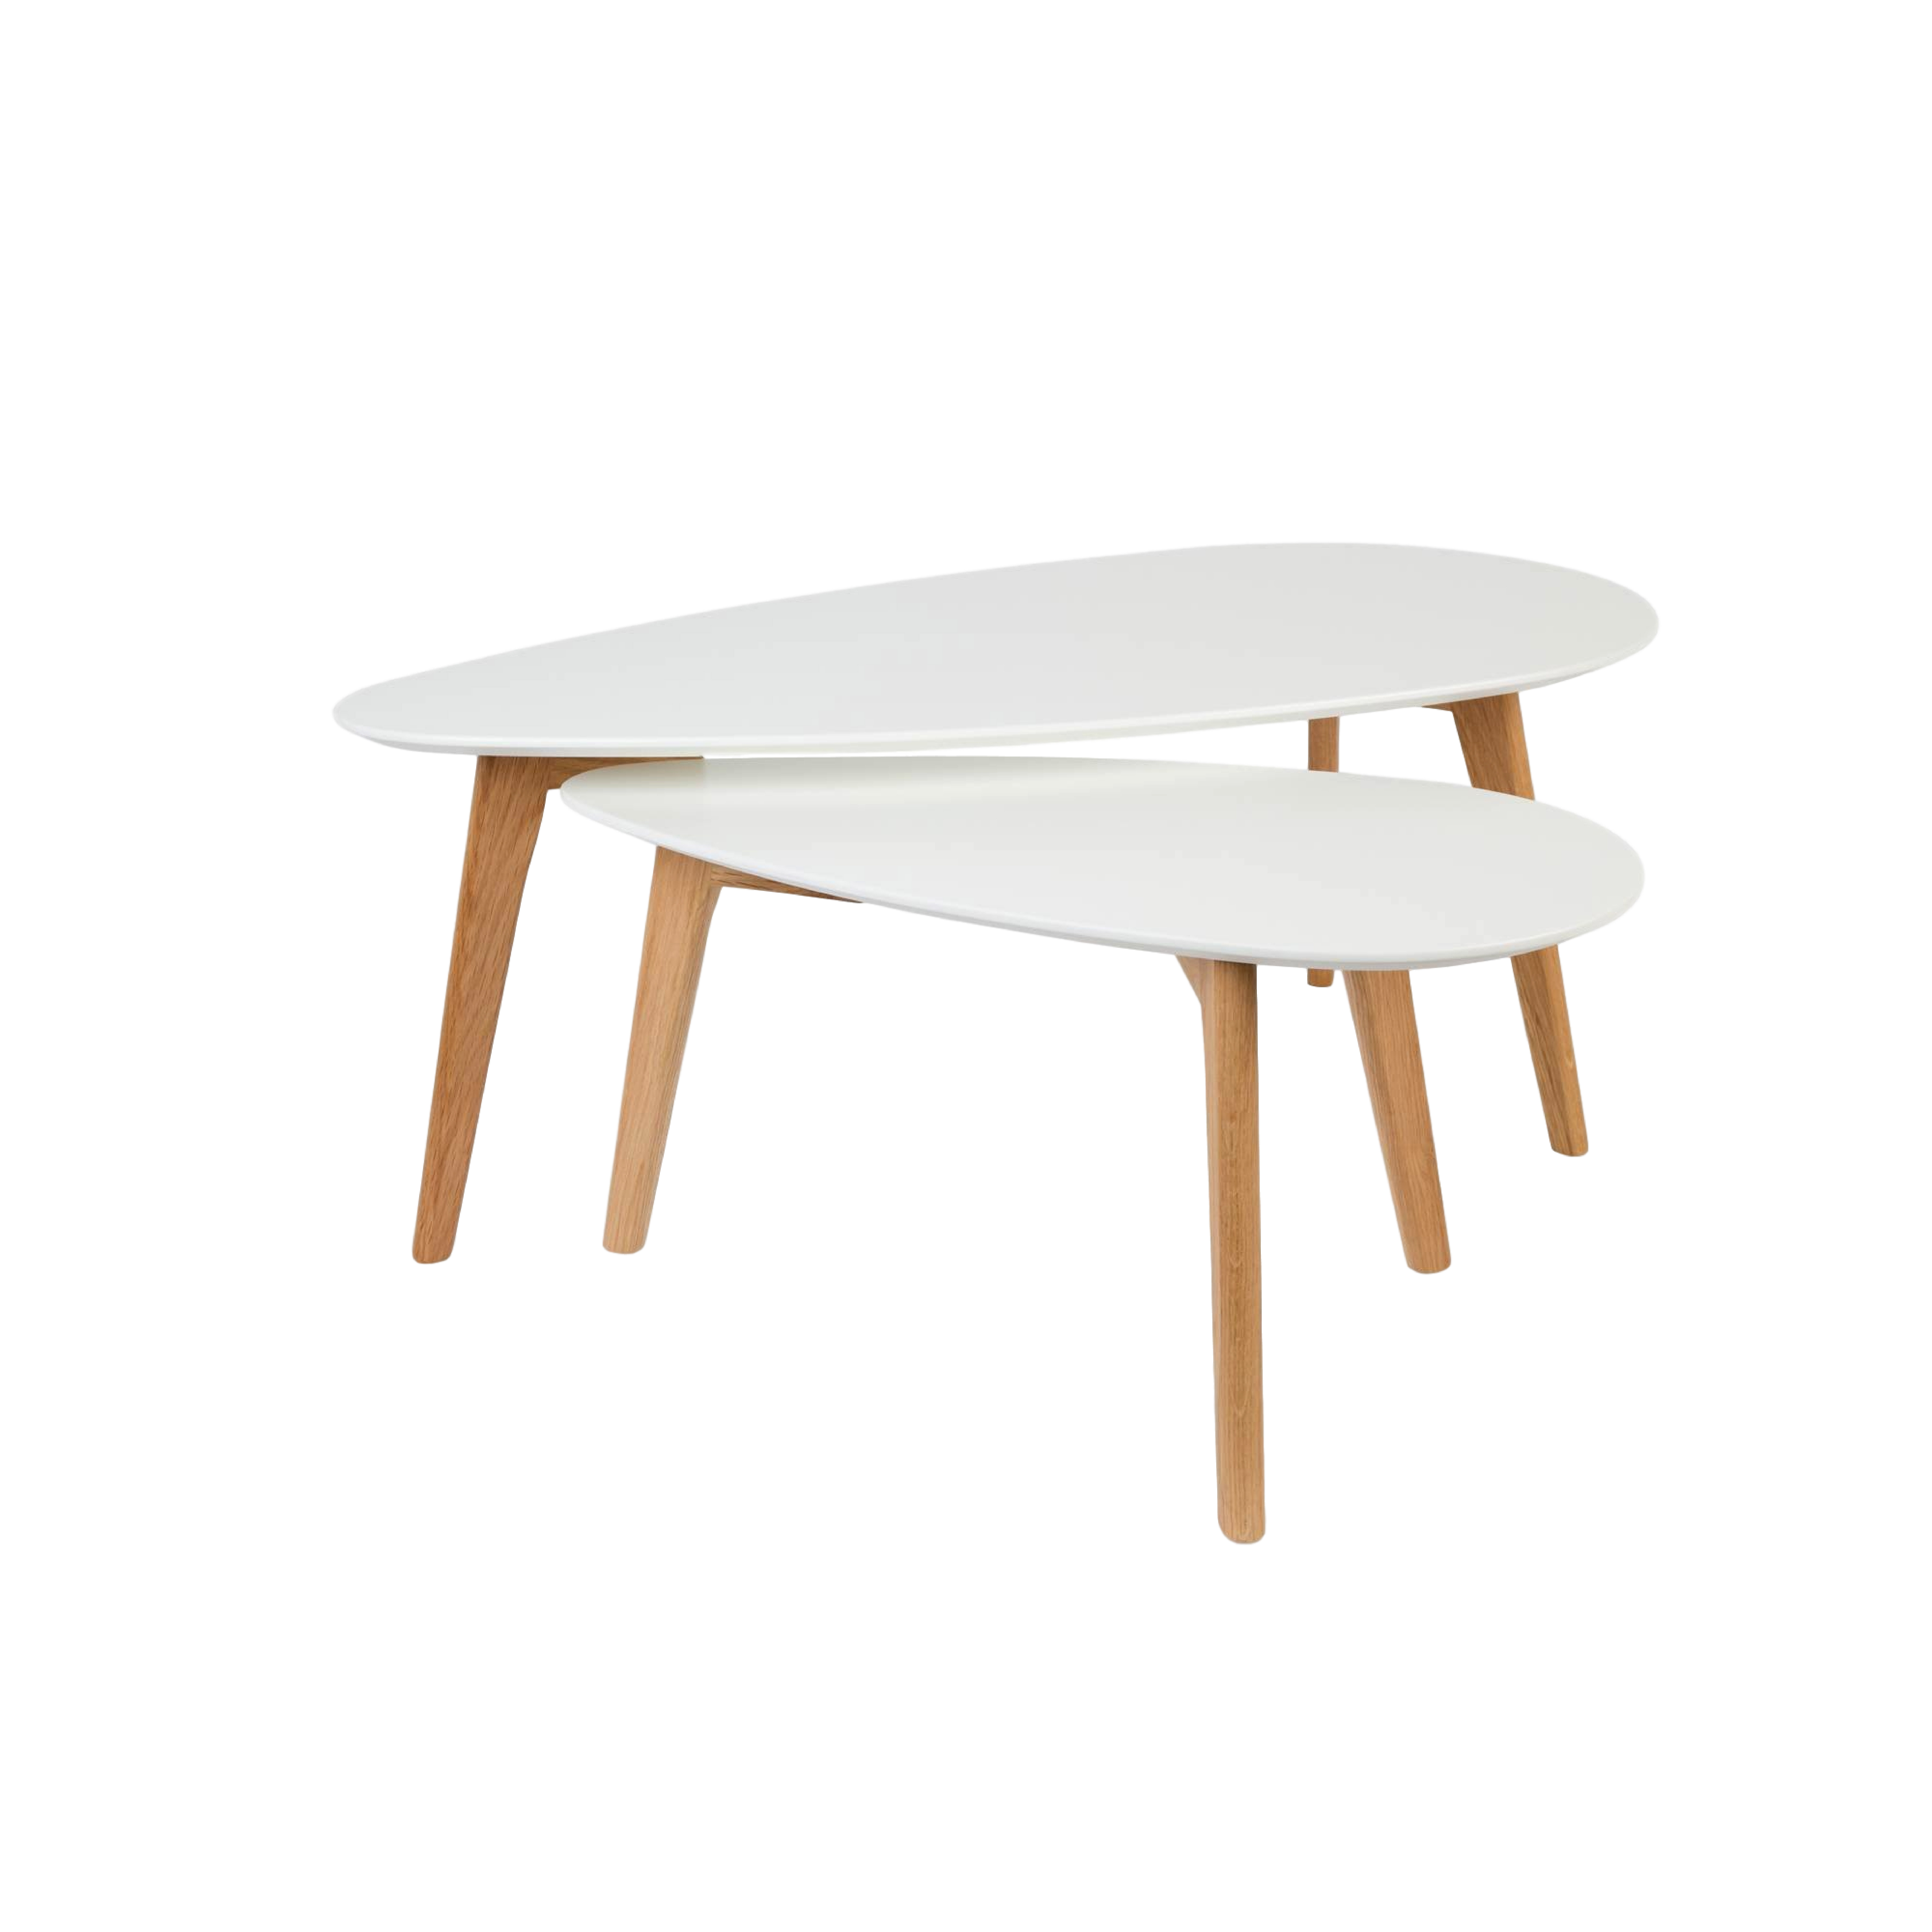 TABLES BASSES BICOLORES 3 SUISSES COLLECTION – 199€